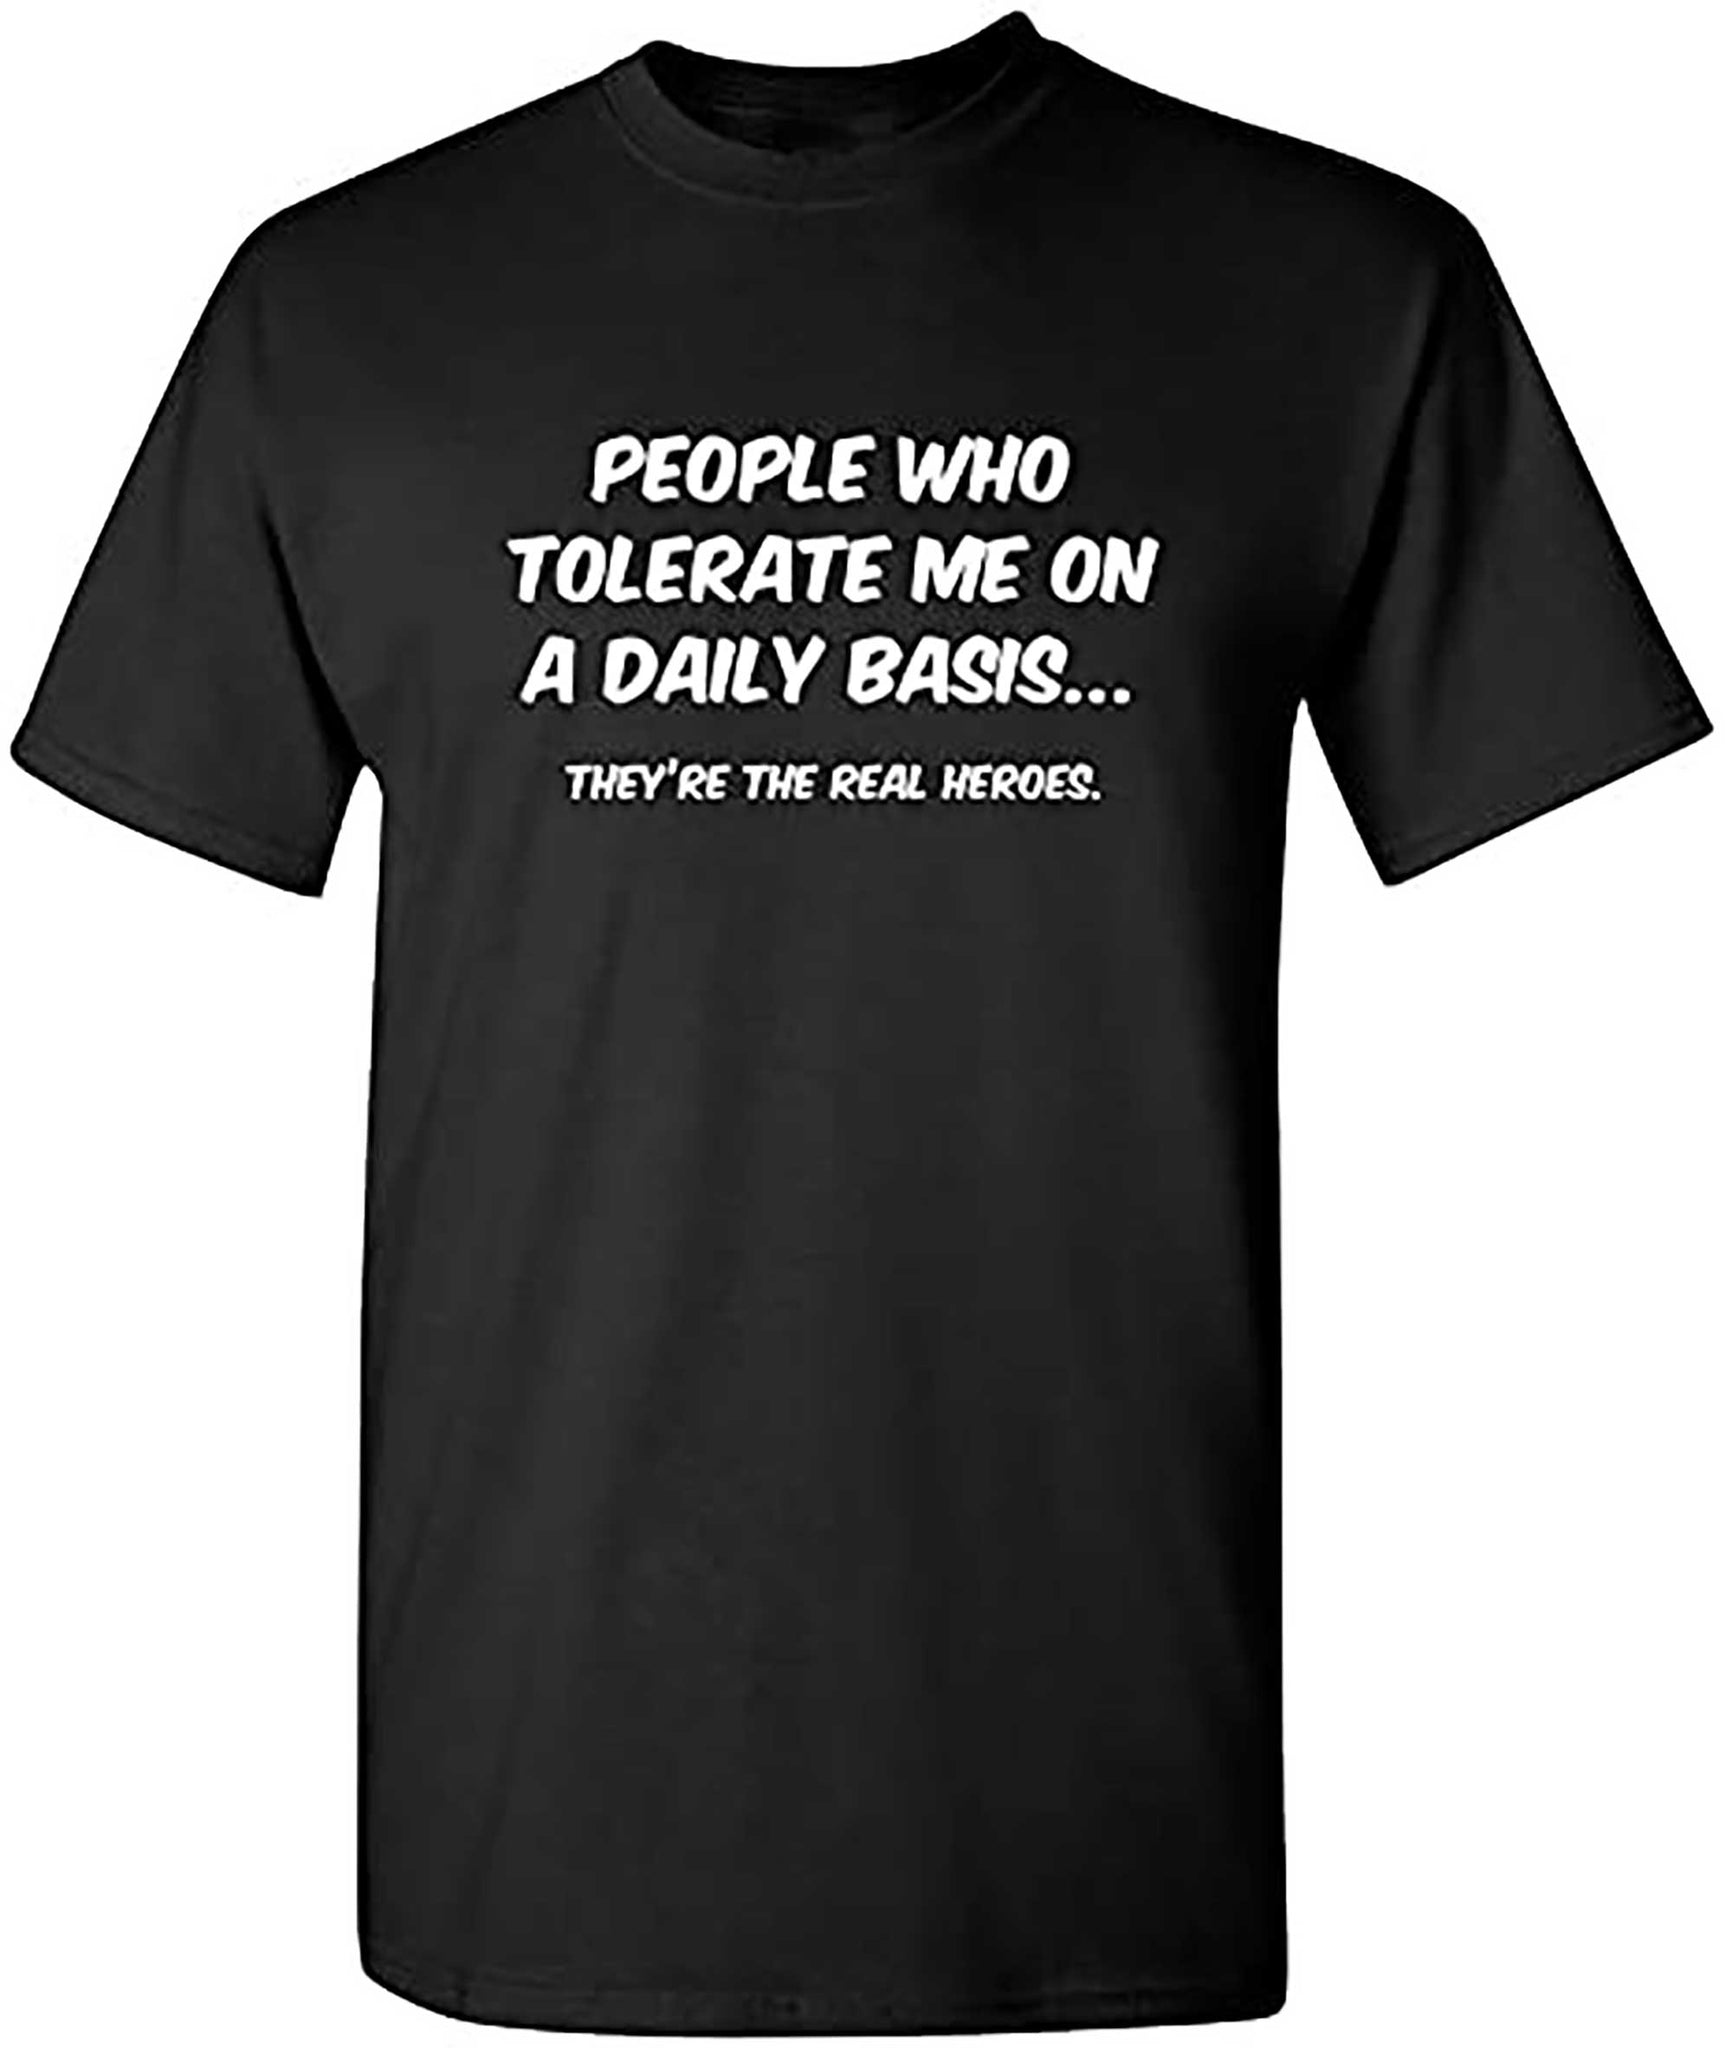 Skitongifts People Who Tolerate Me On A Daily Basis Sarcastic Graphic Novelty Funny T Shirt